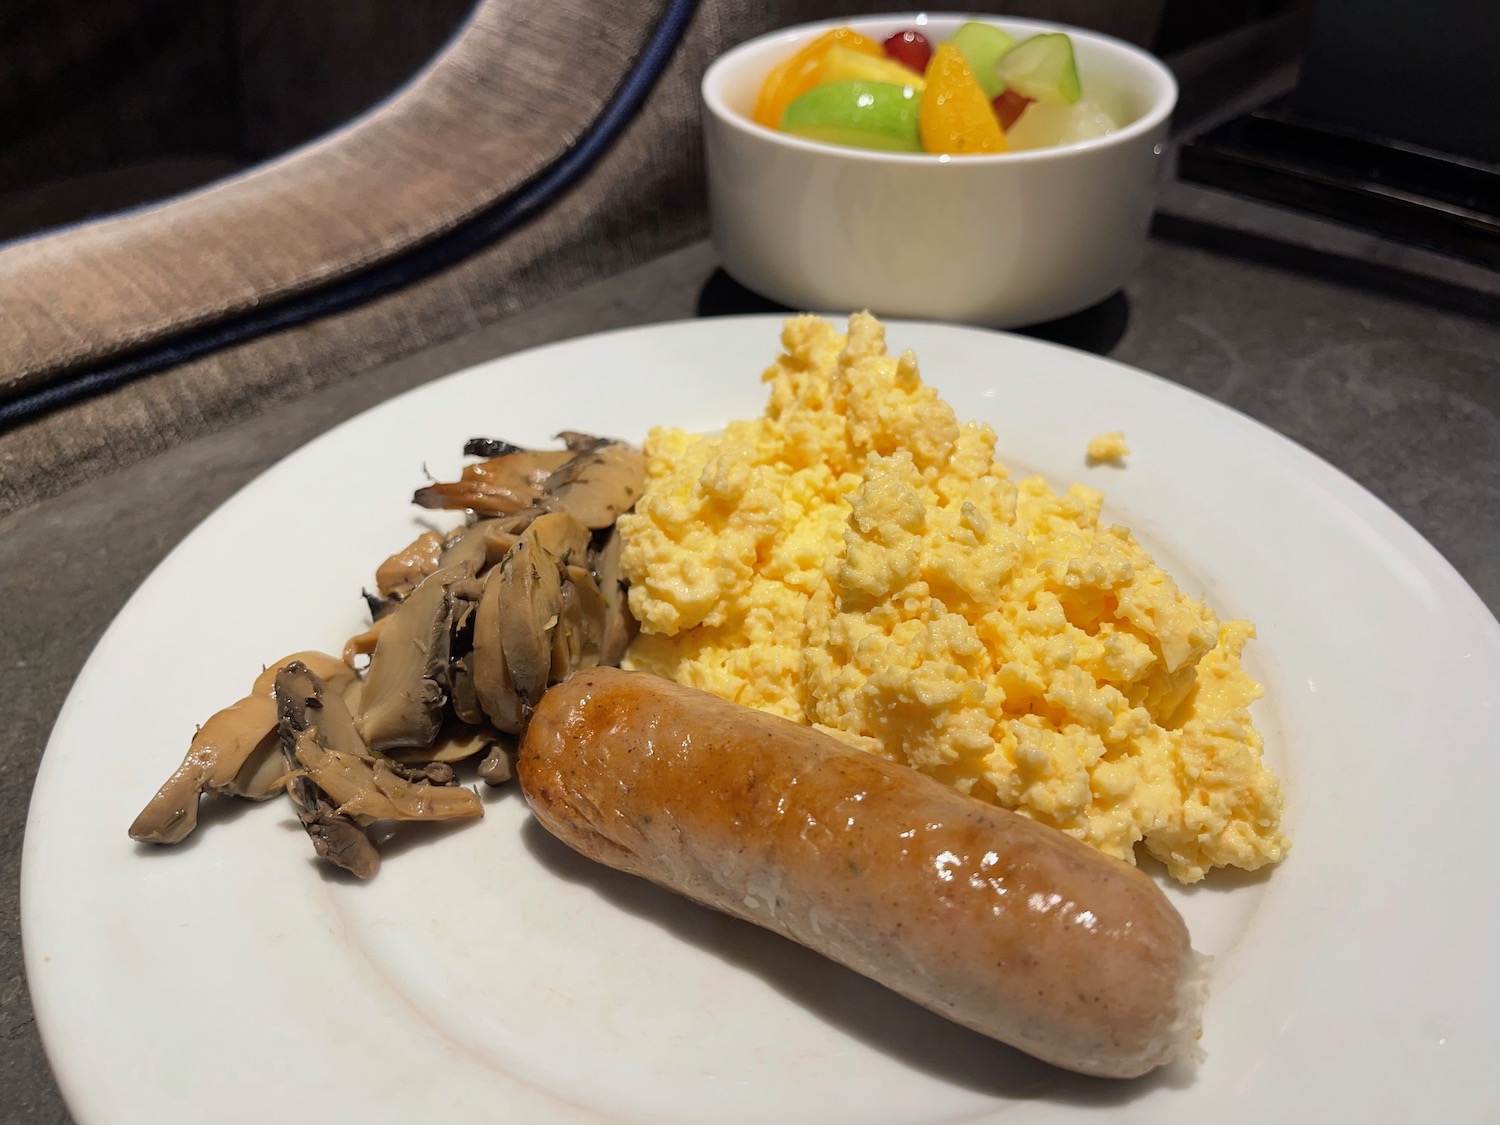 a plate of food with sausage and eggs